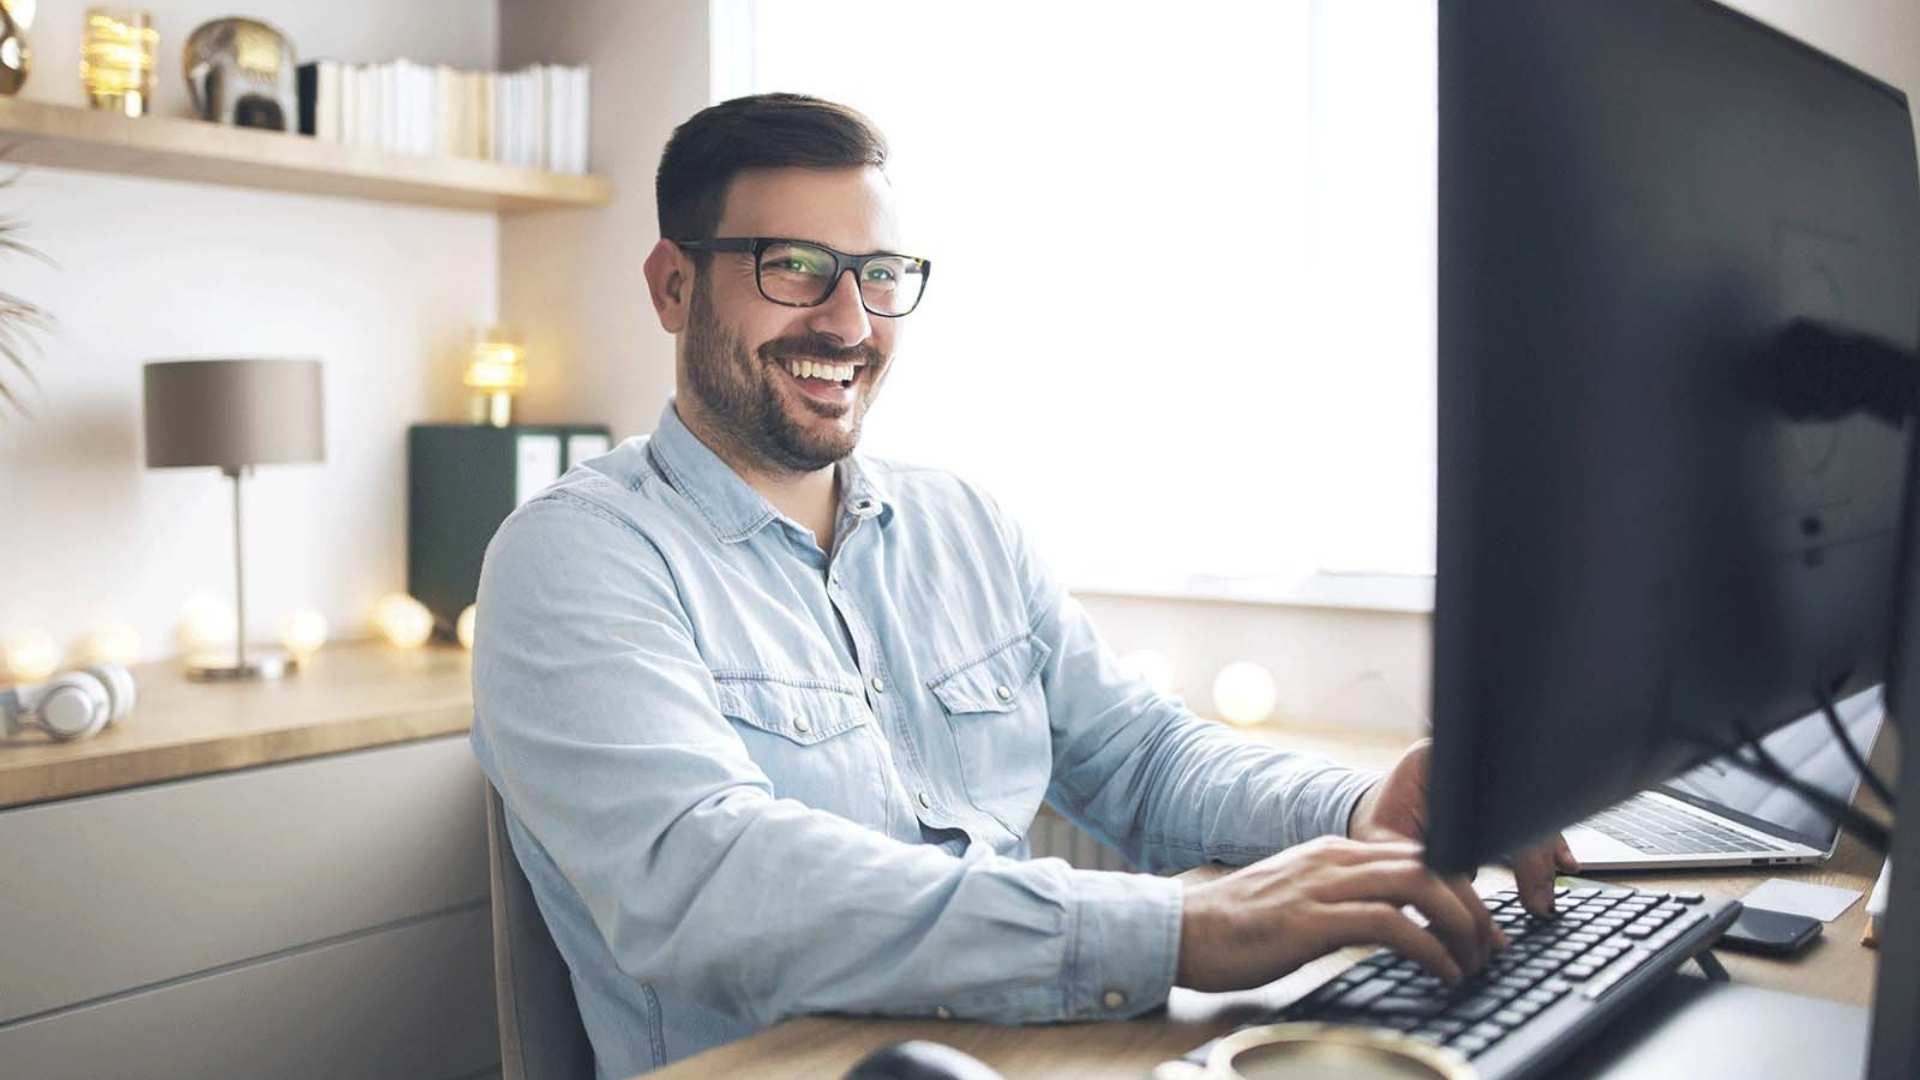 Featured image for B2B E-Commerce Startup Package - Smiling man learning something new on the computer